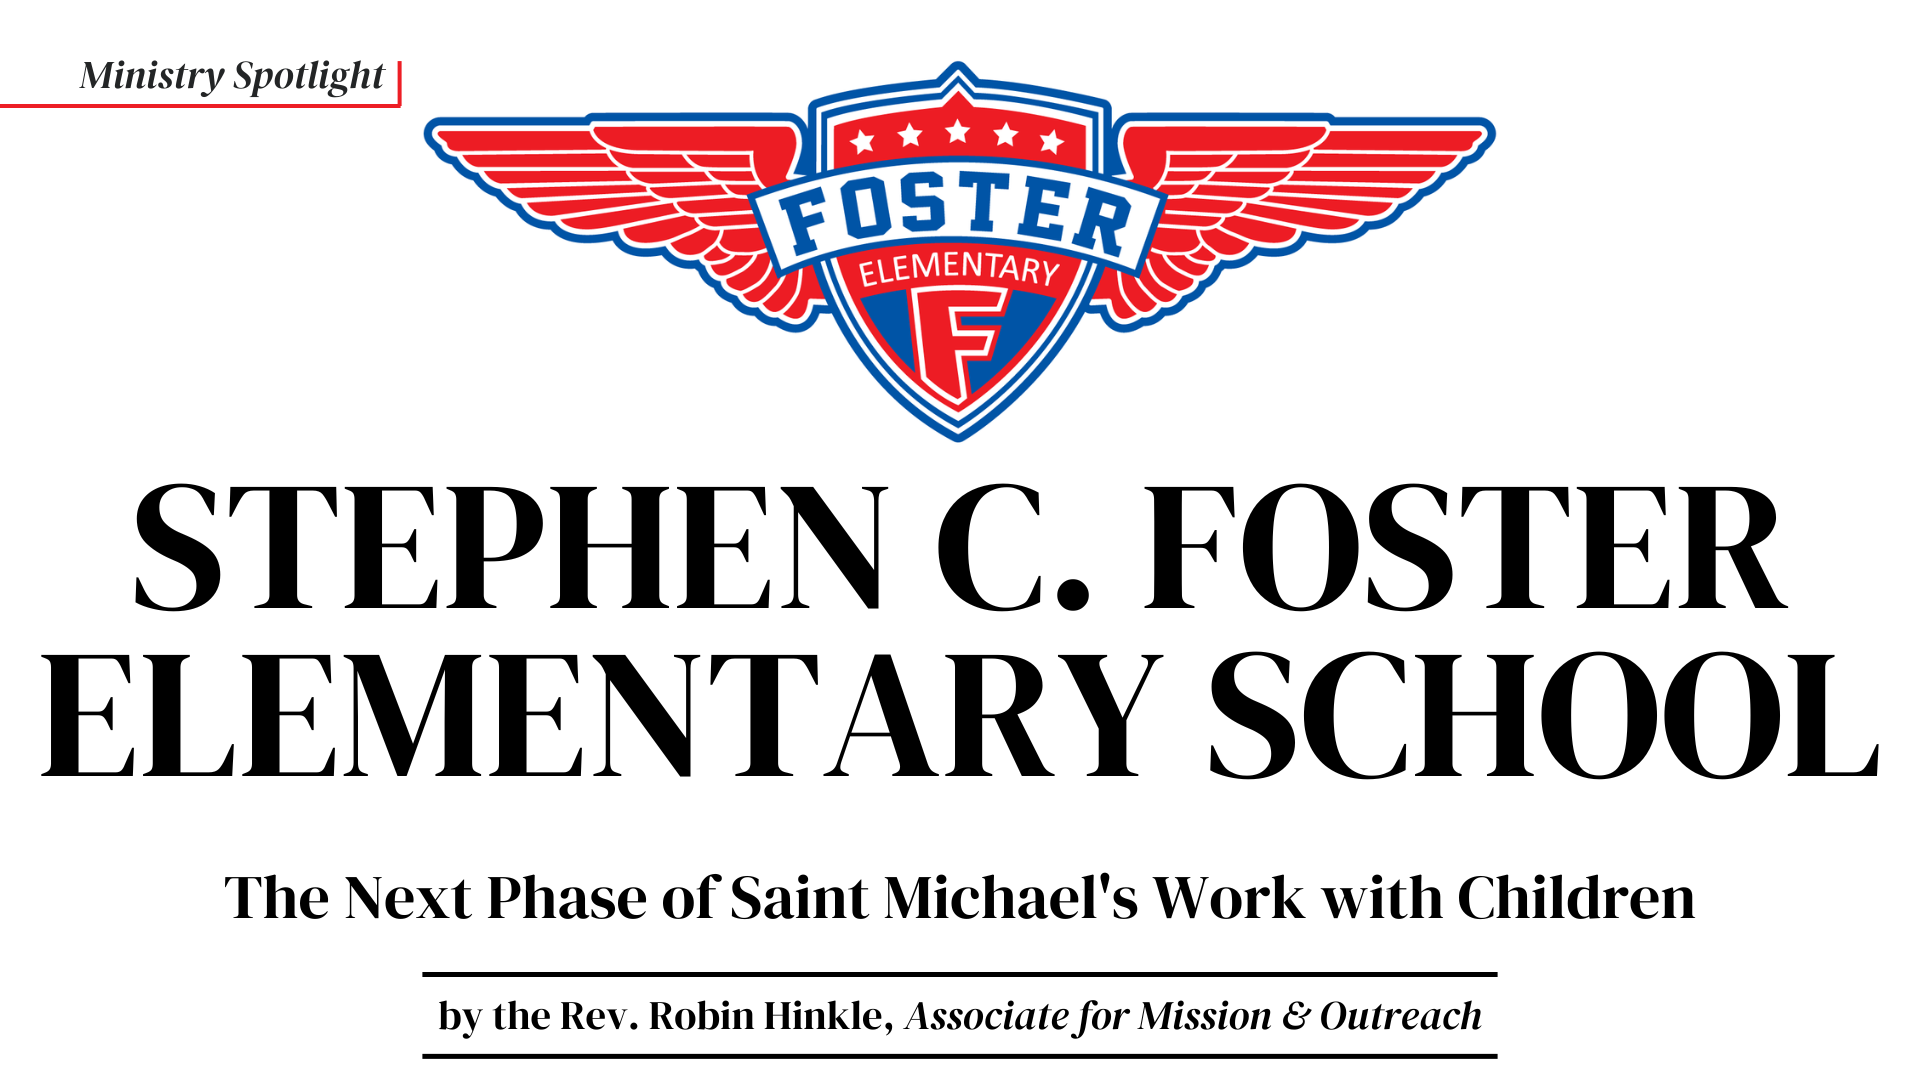 Stephen C. Foster Elementary School by the Rev. Robin Hinkle, The Next Phase of Saint Michael's Work with Children